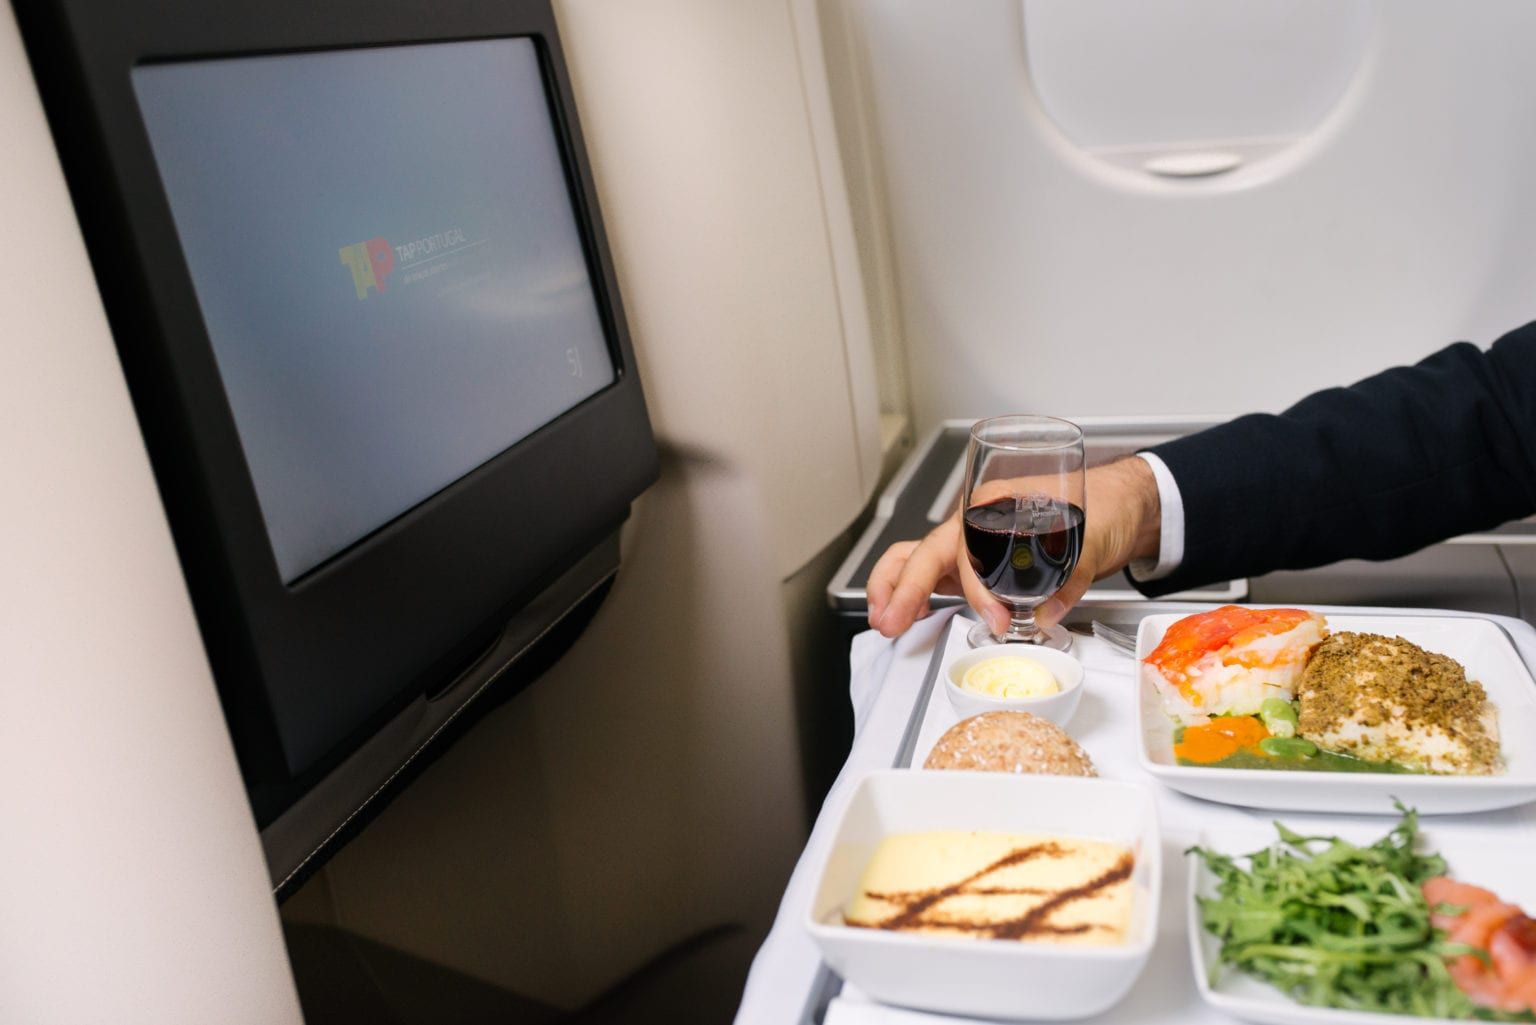 TAP Portugal business class food and beverage